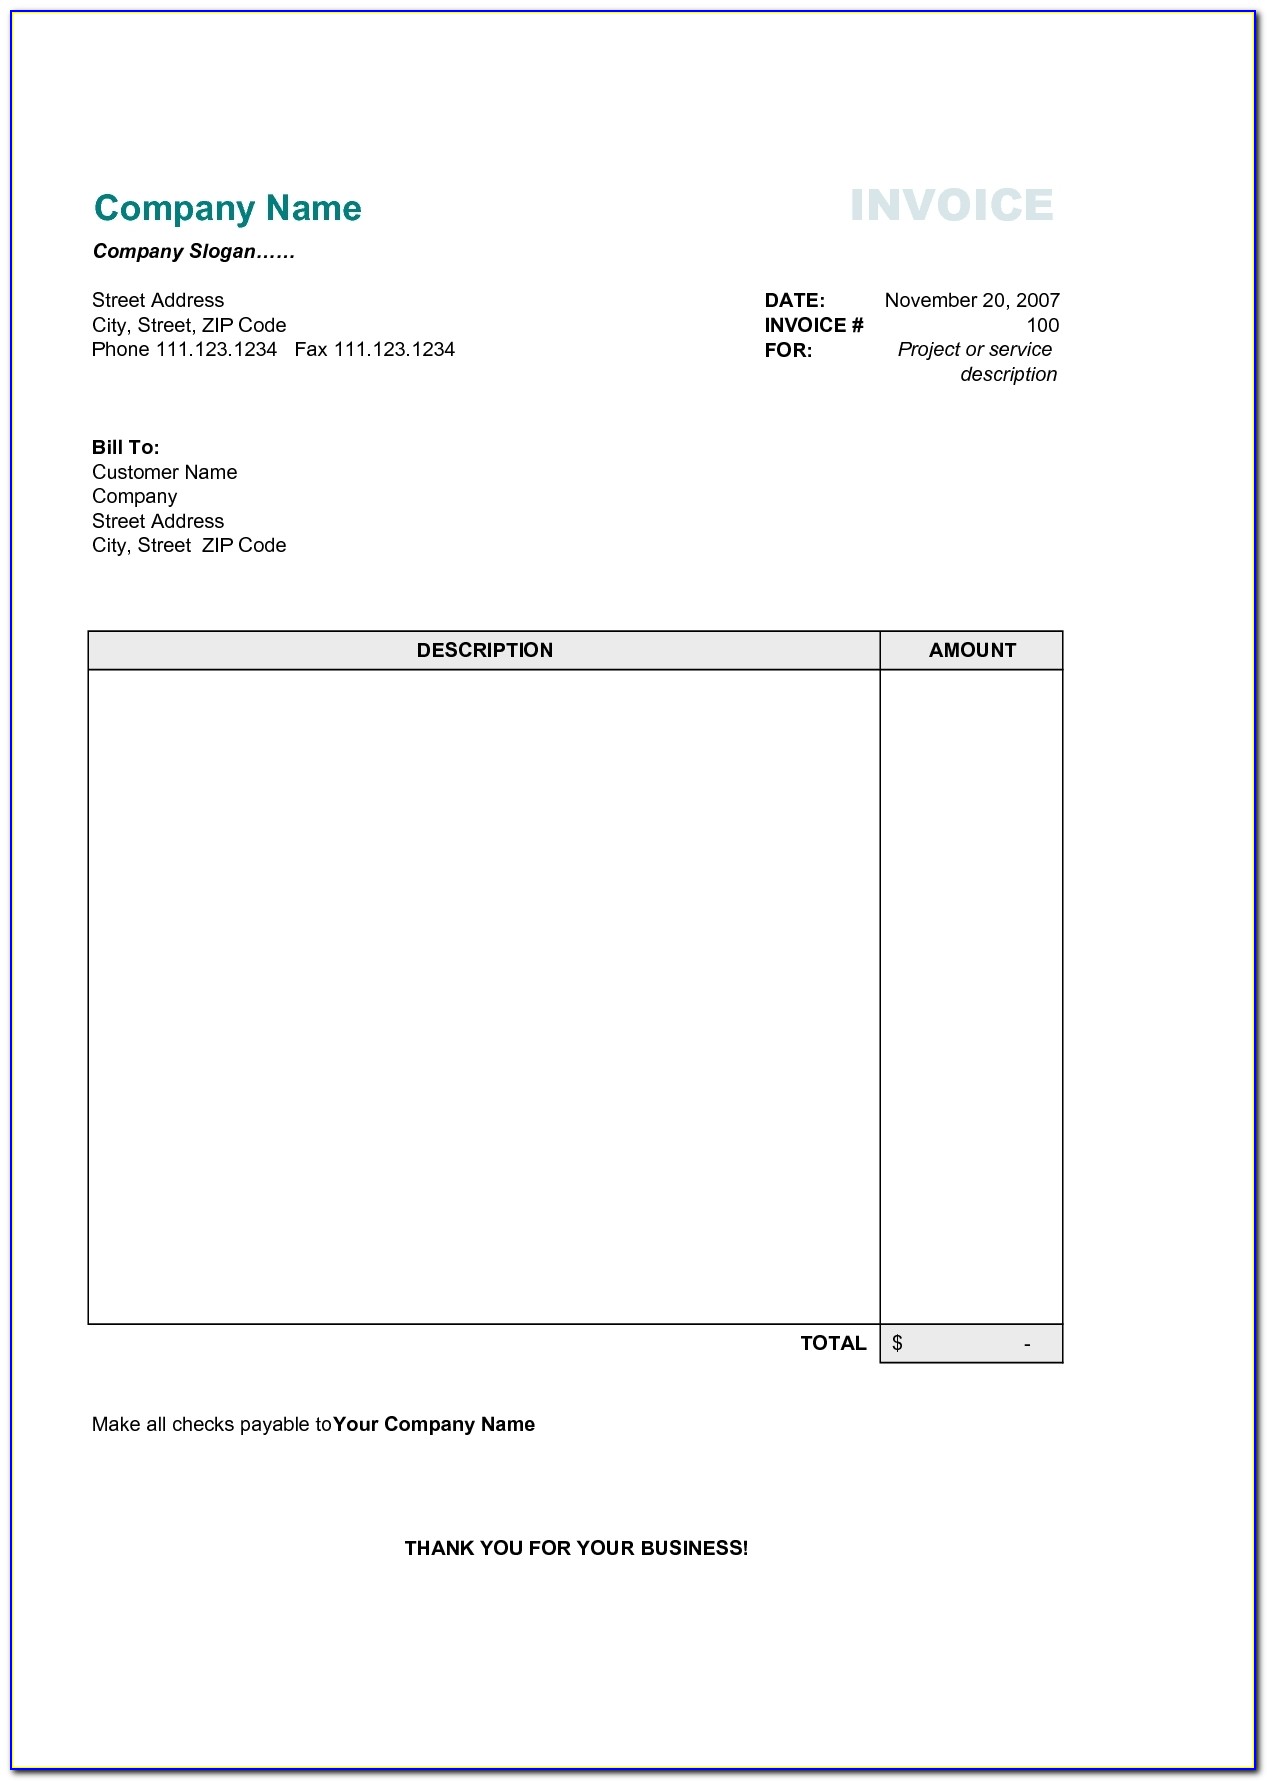 Simple Invoice Template Excel Invoice Template Free 2016 Simple Invoice Template Pdf